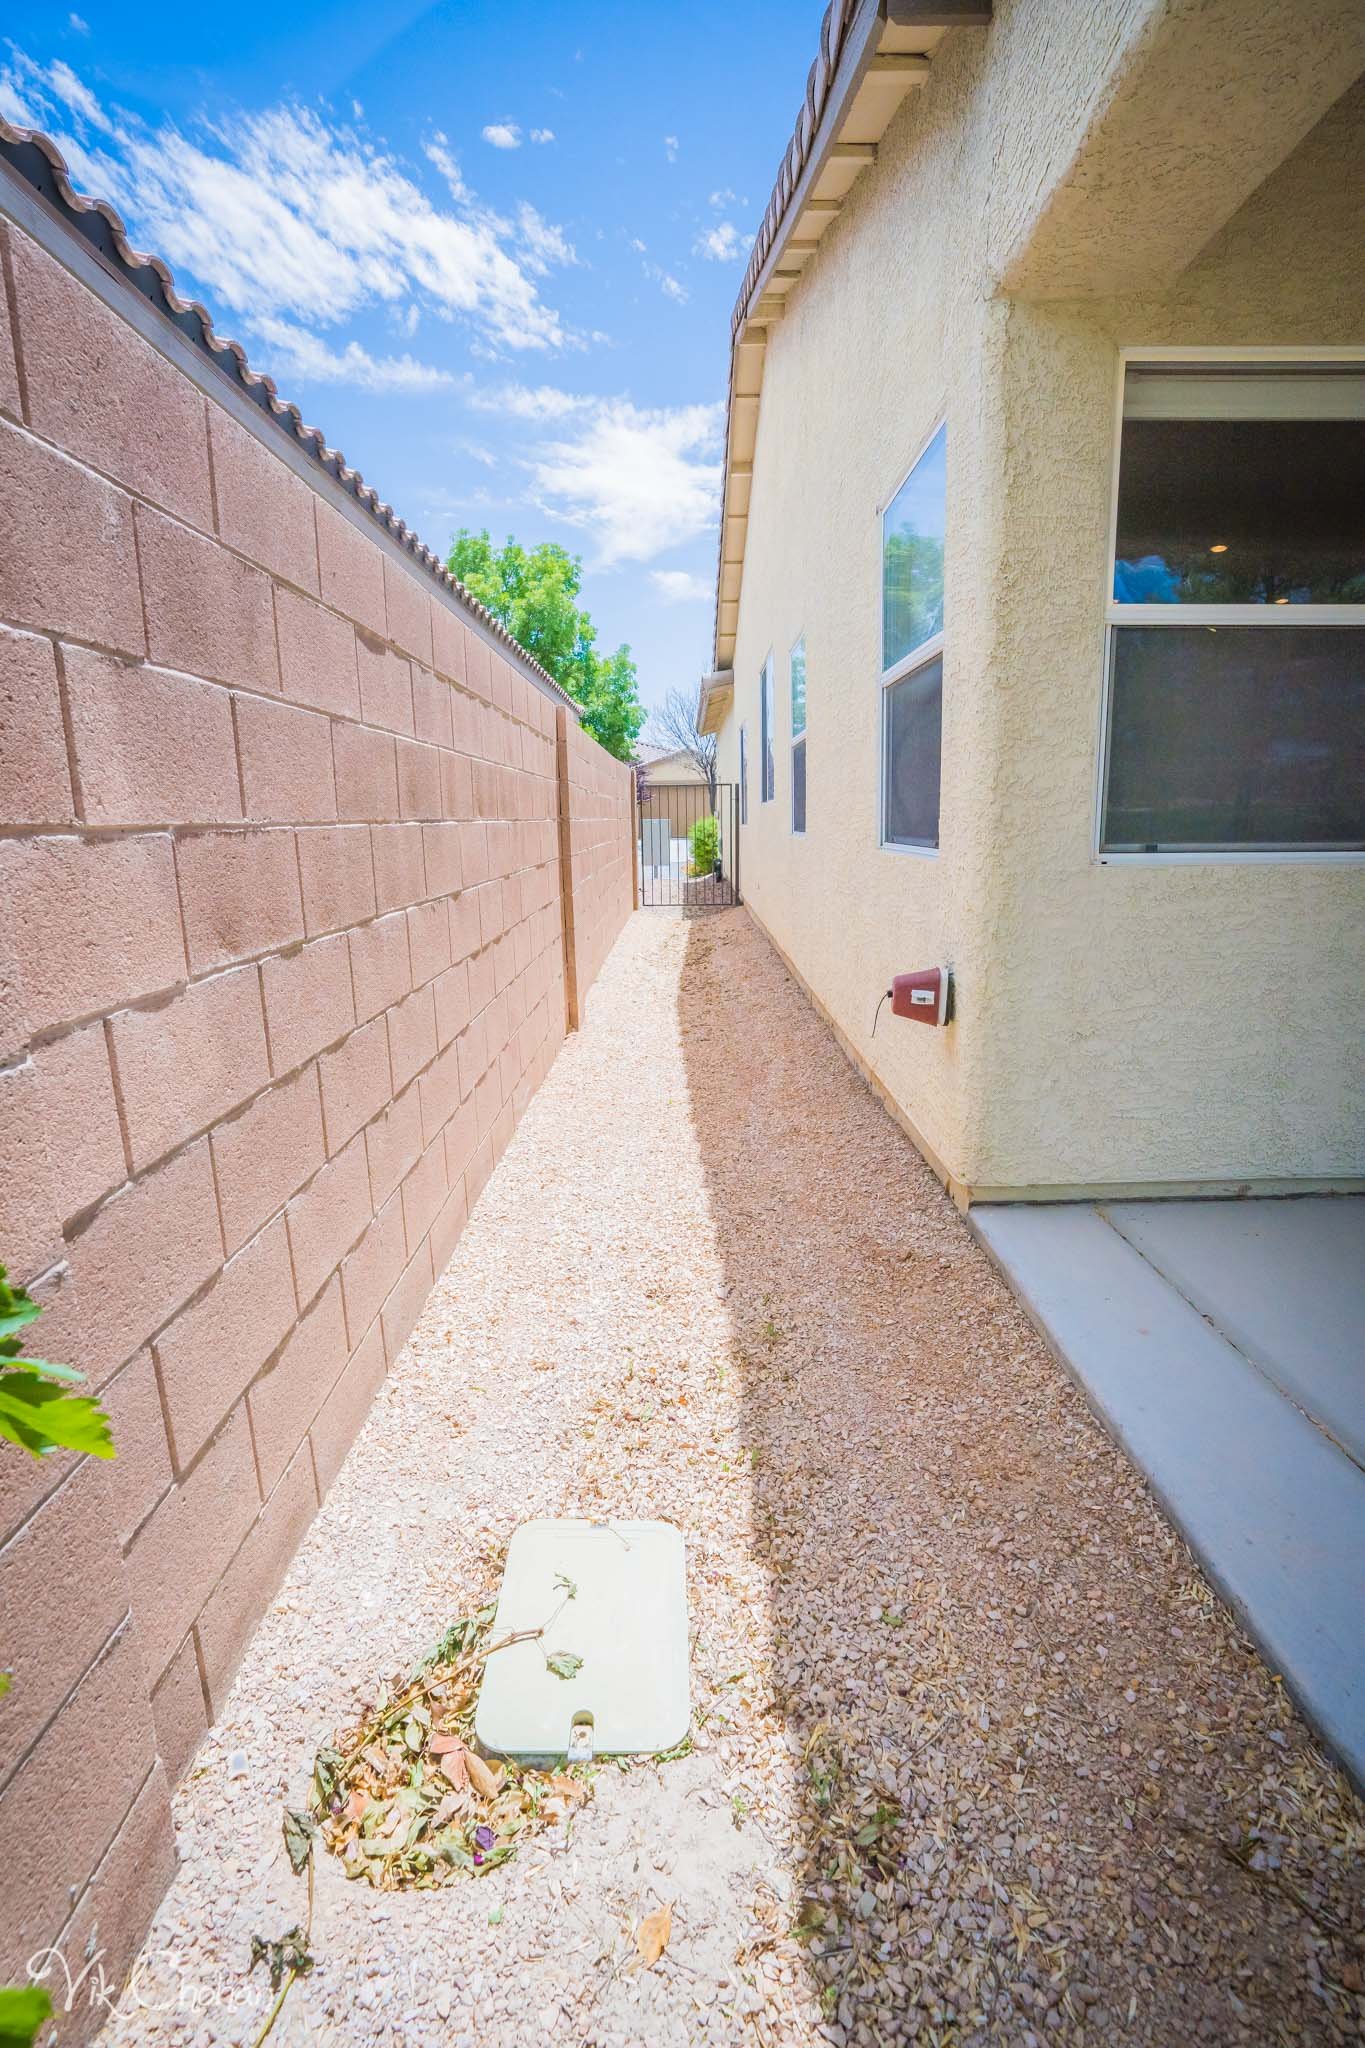 2022-05-15-5378-E-Cansano-St-Pahrump-Real-Estate-Photography-Virtual-Tour-Drone-Photography-Vik-Chohan-Photography-Photo-Booth-Social-Media-VCP-108.jpg